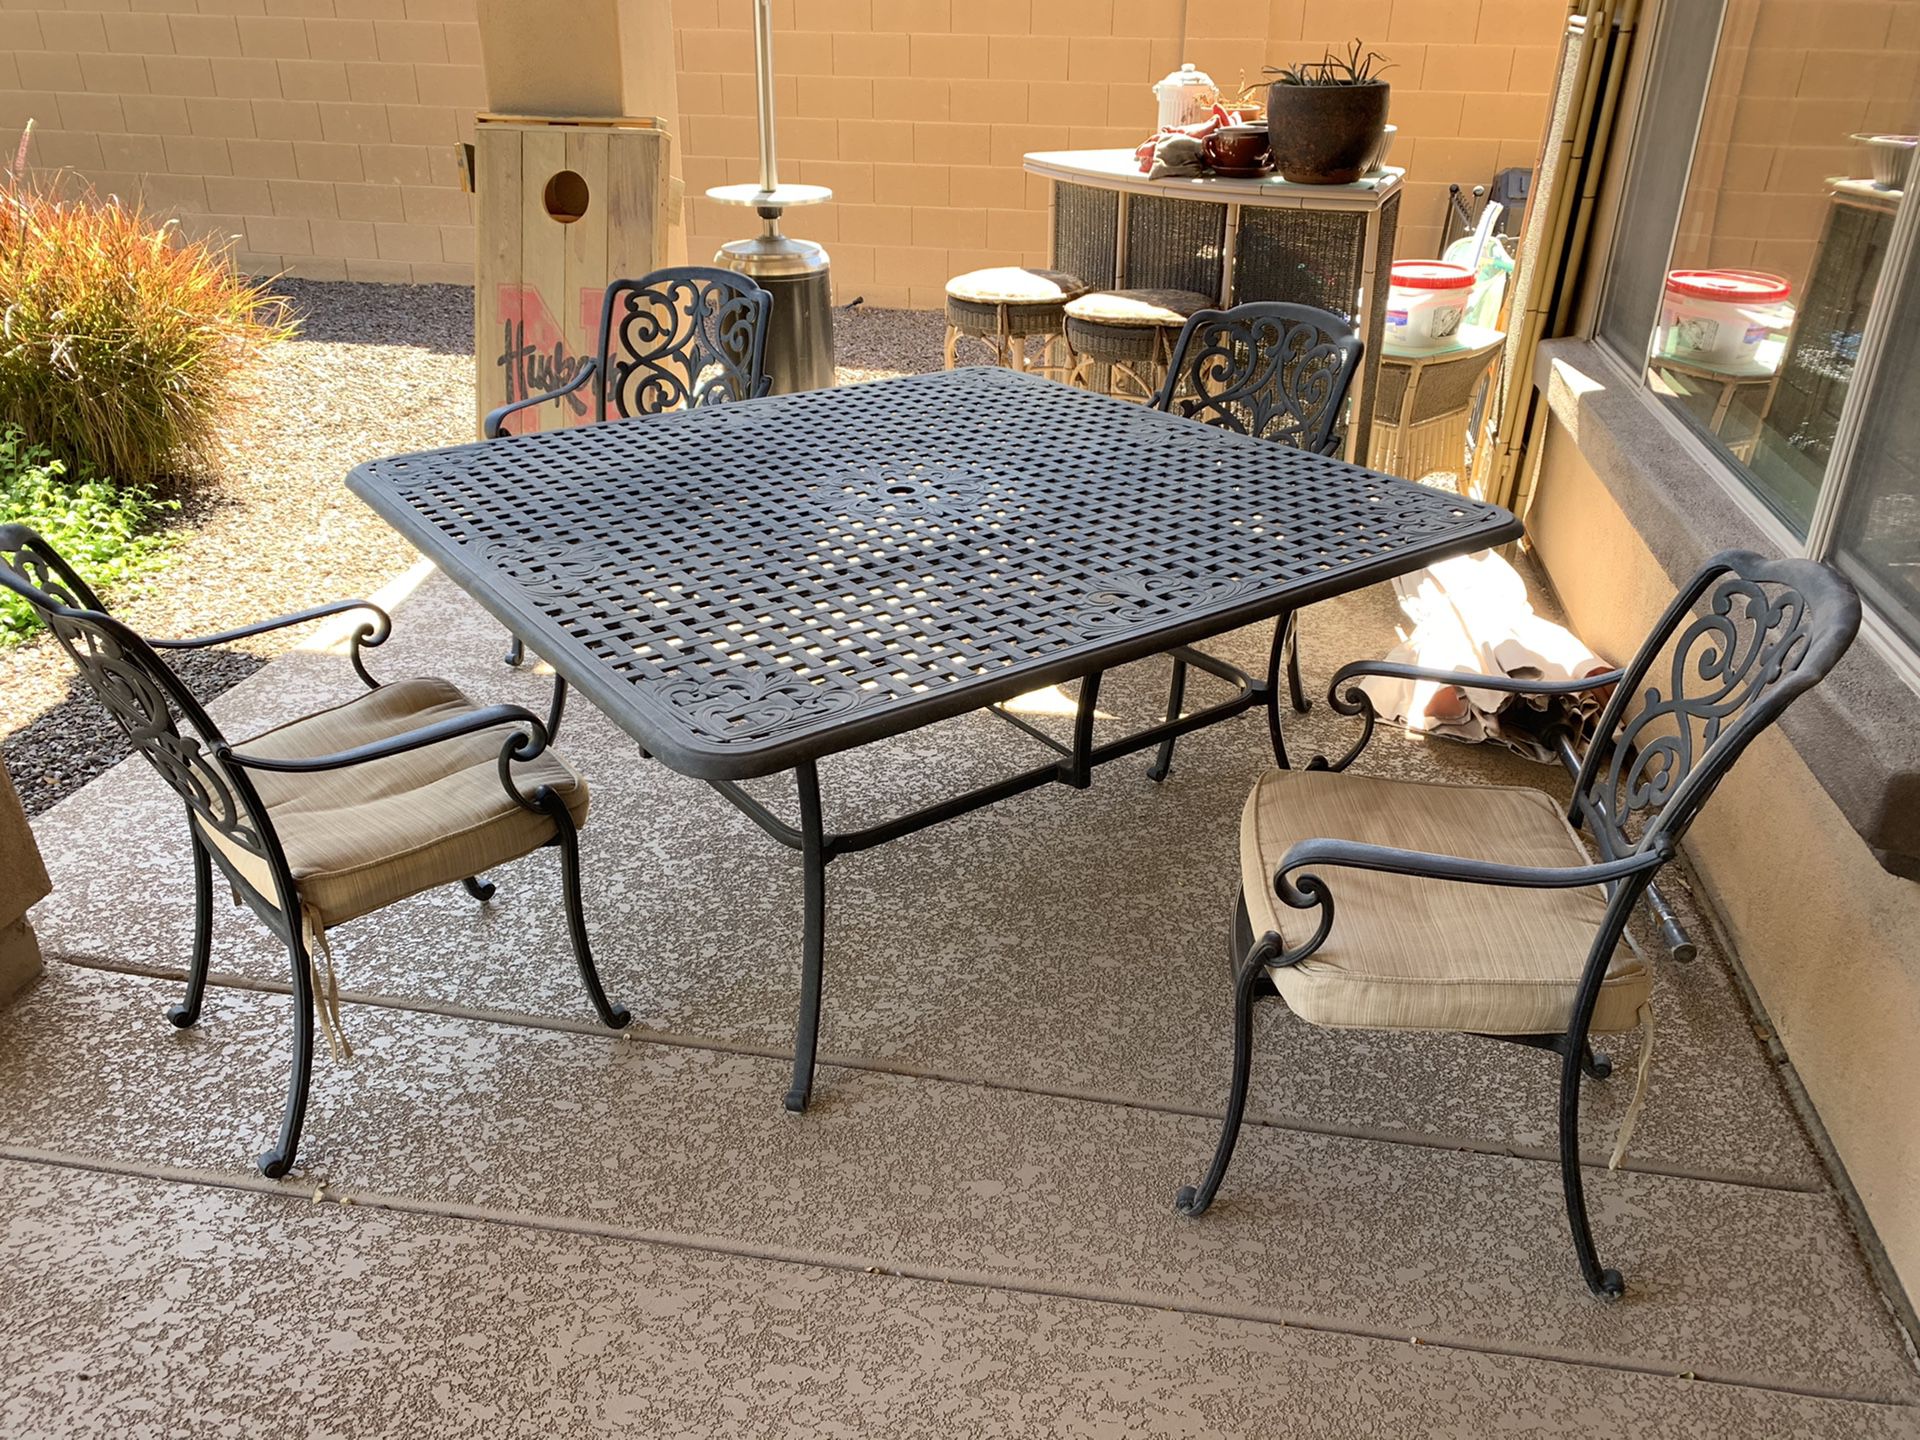 Outdoor dining table and chairs w/umbrella